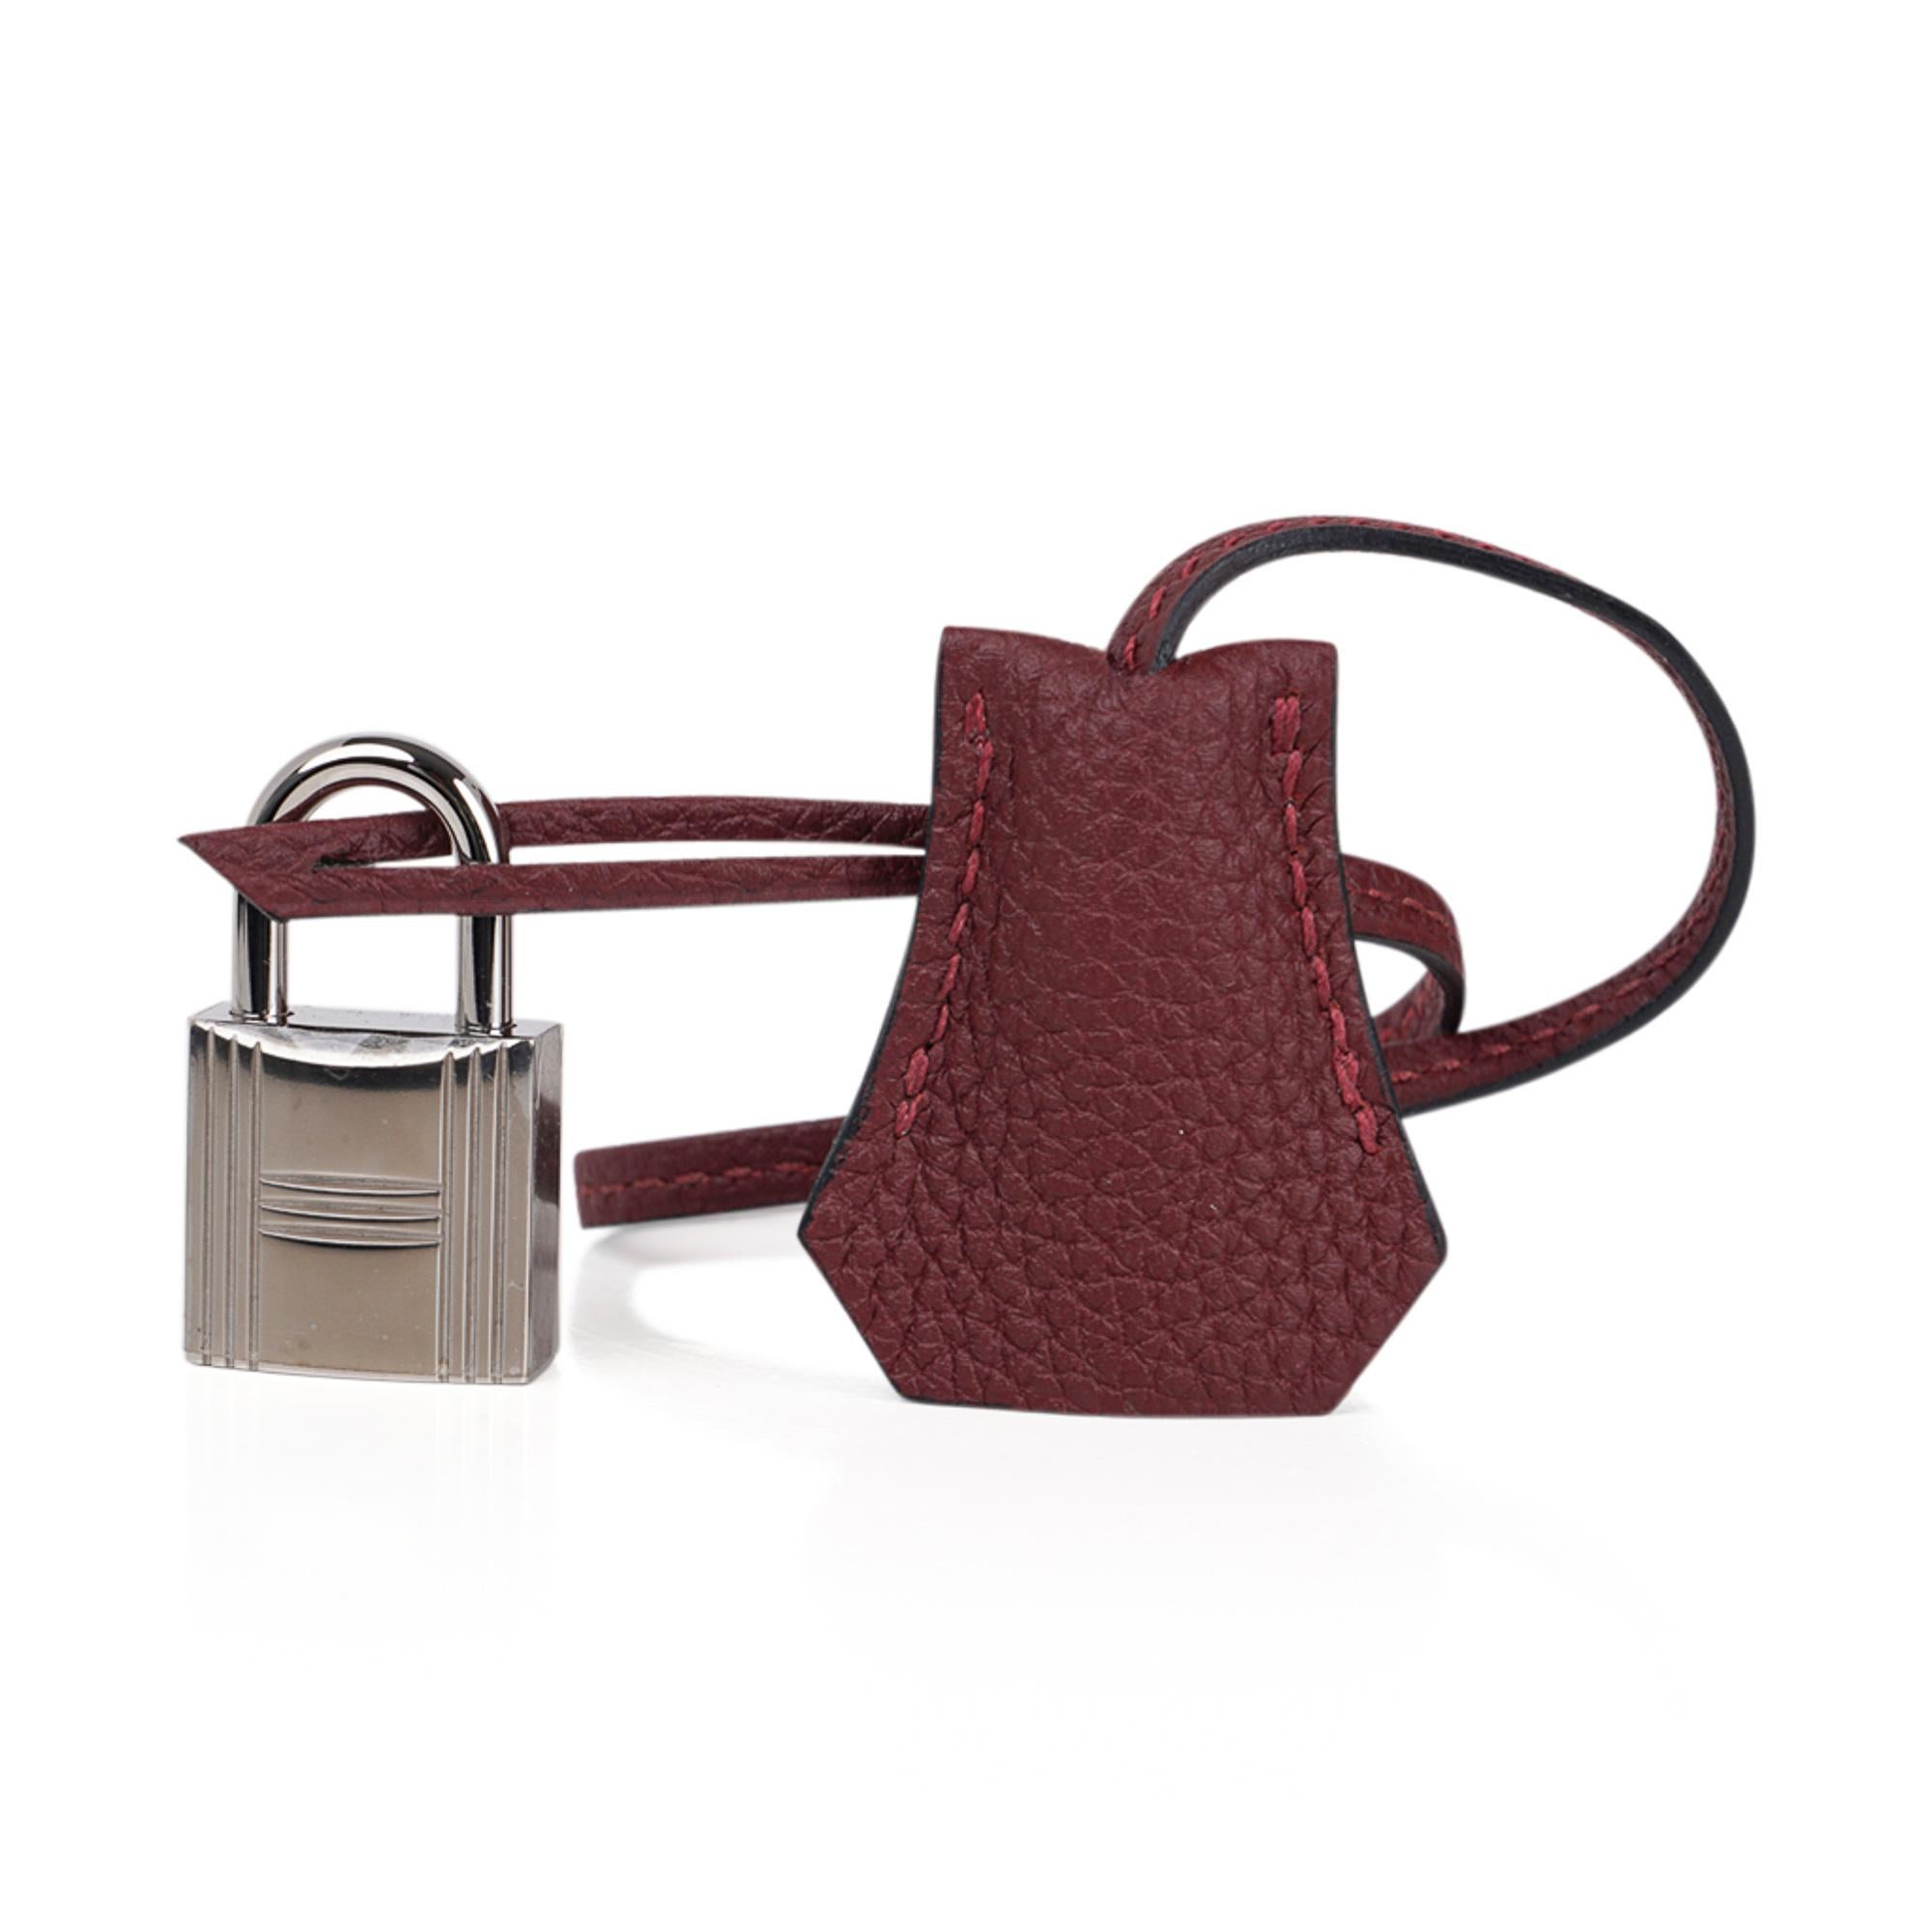 Mightychic offers a guaranteed authentic Hermes 45cm Bolide featured in rich jewel toned Rouge H.
Crisp Palladium hardware.
The Weekender is featured in Togo leather, beautiful and scratch resistant.
Doubled rolled handles and top zip